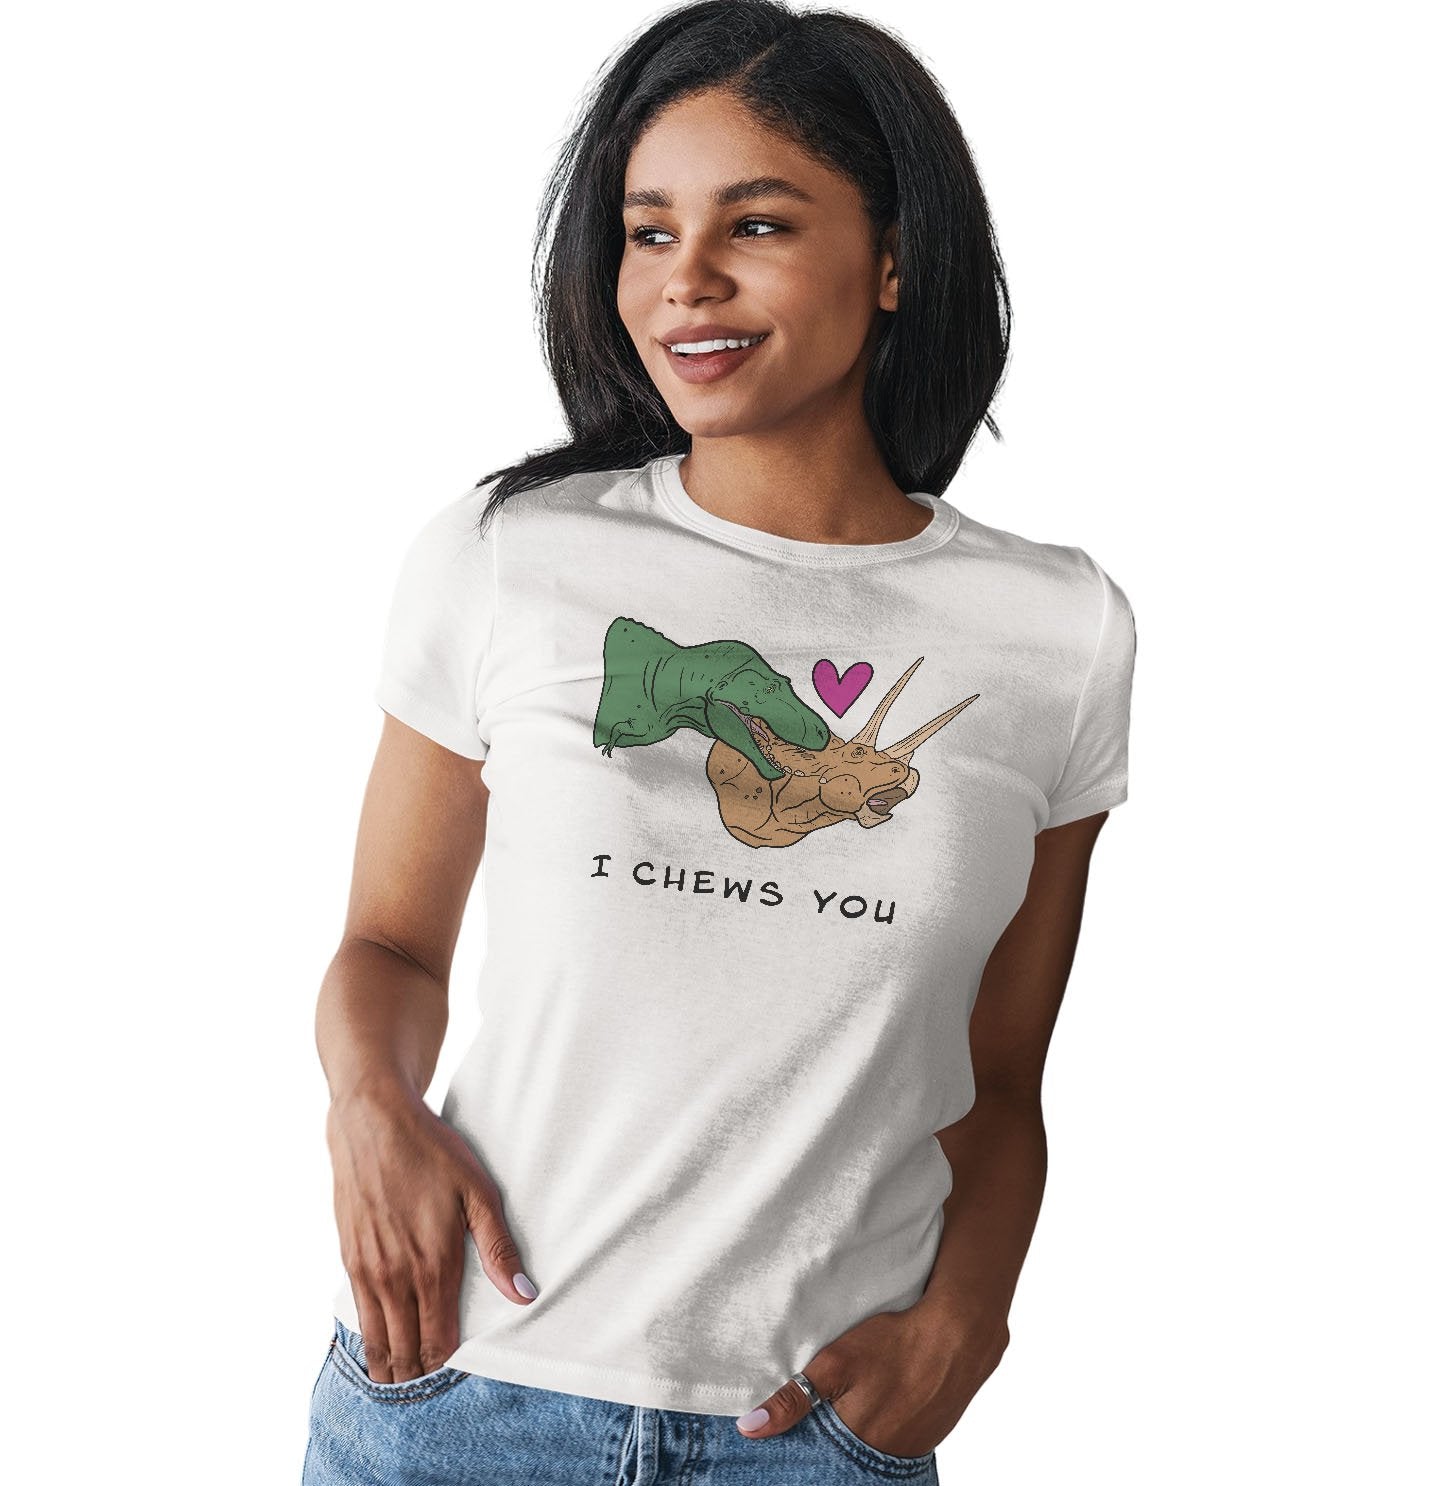 I Chews You - Women's Fitted T-Shirt